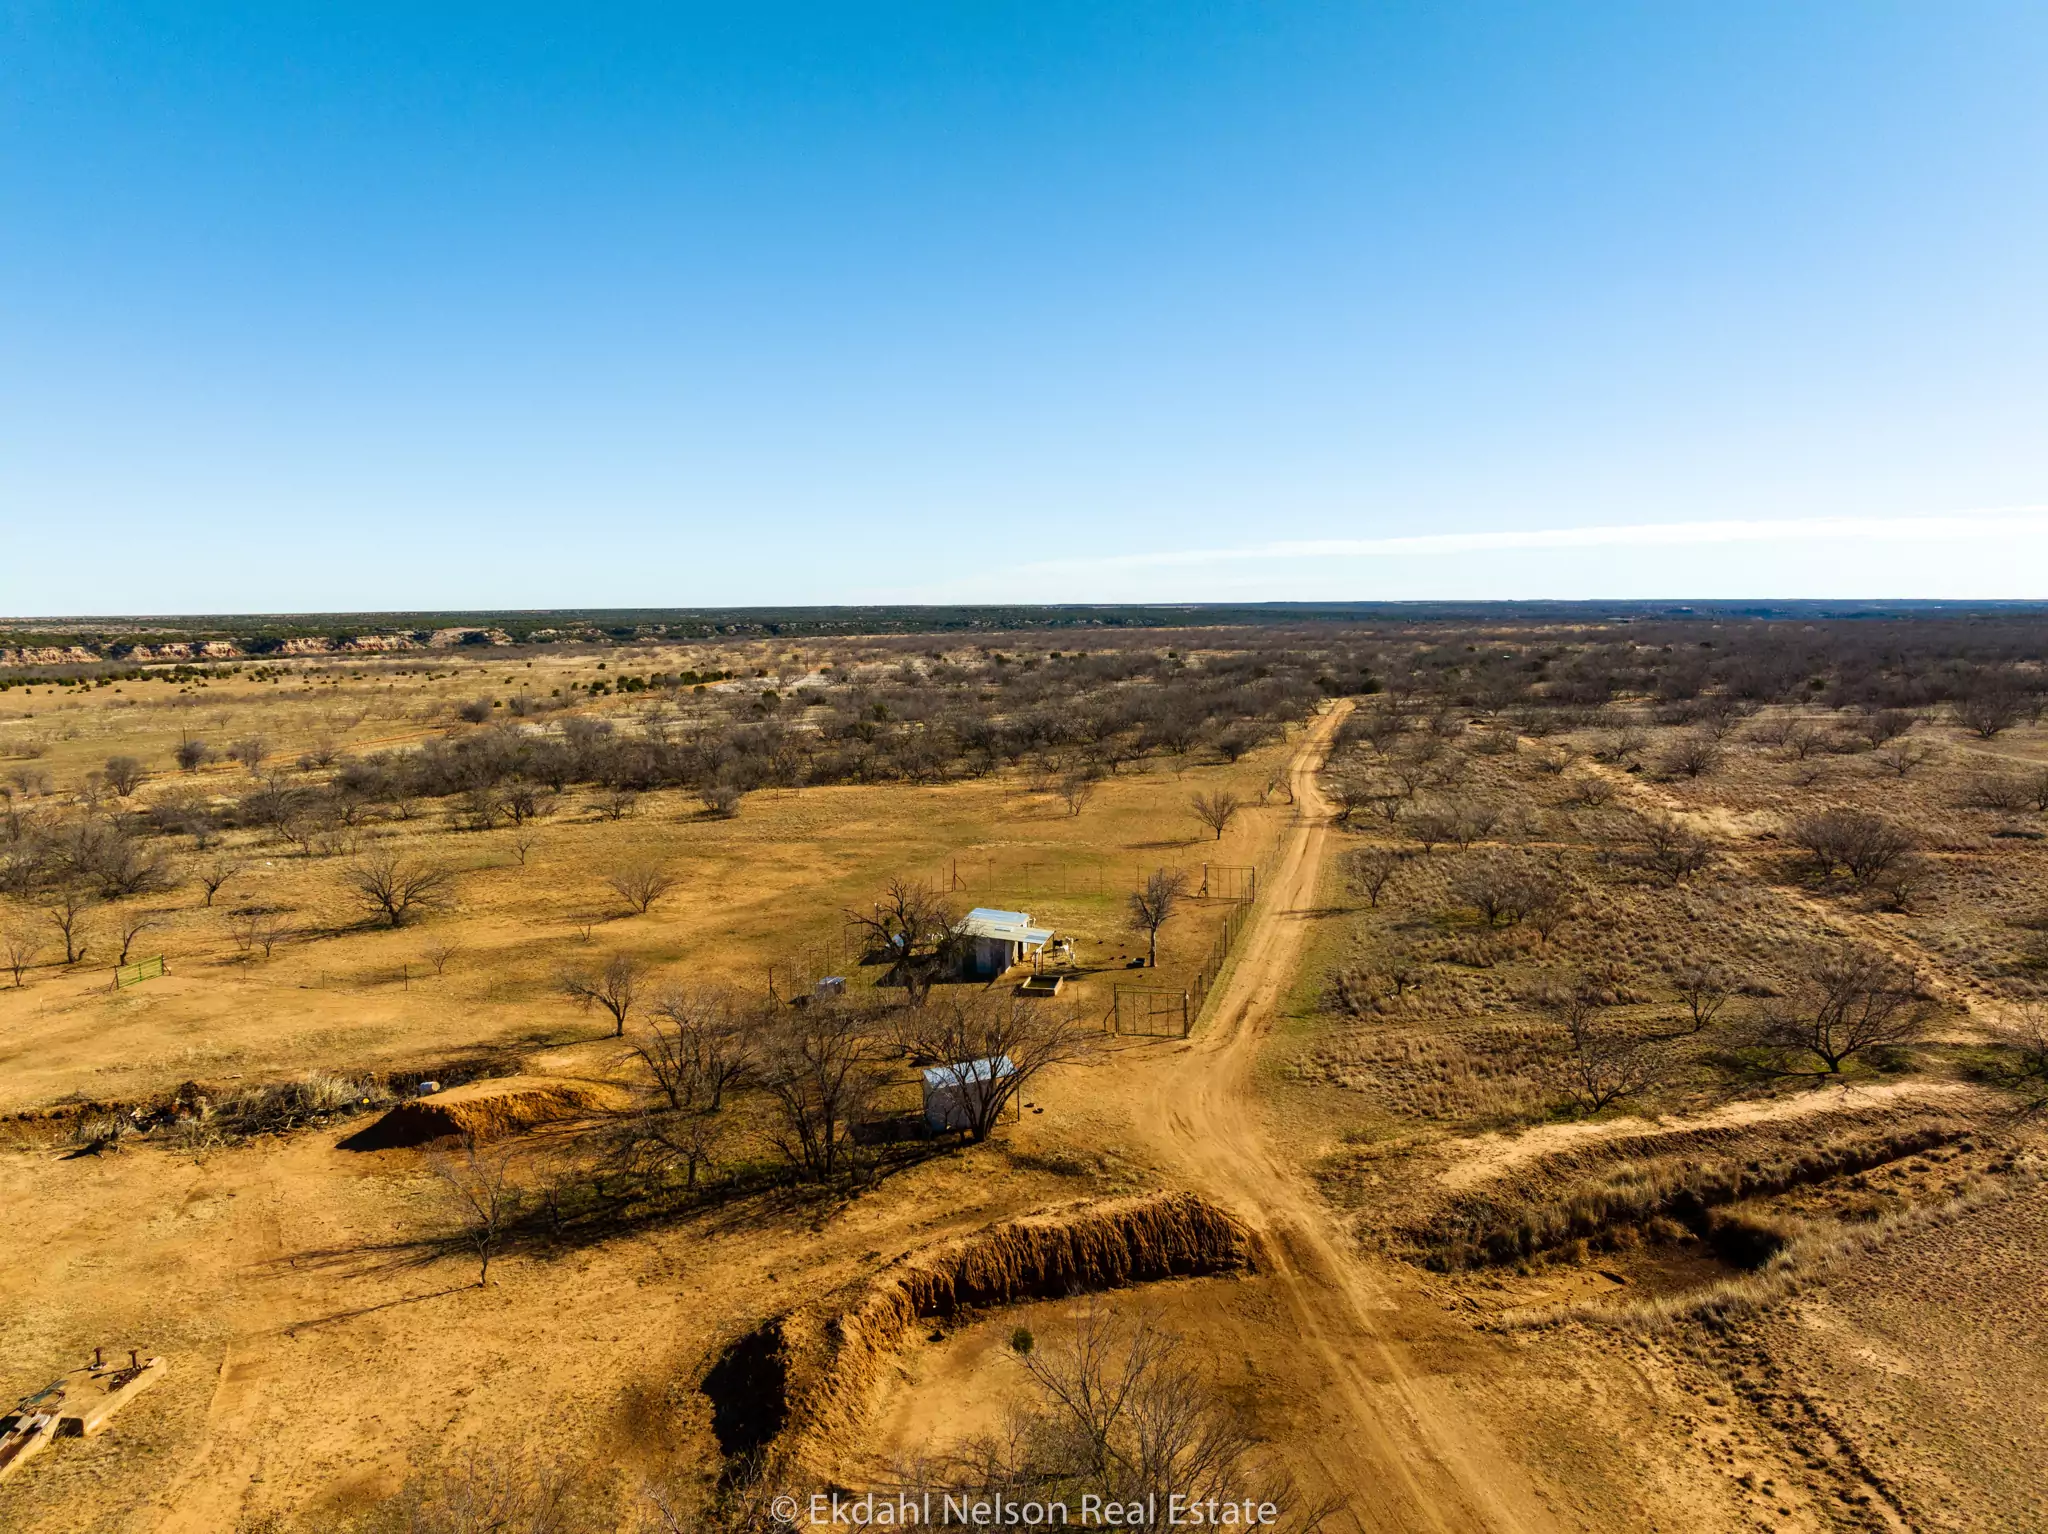 hunting properties for sale in West Texas - real estate in west texas - ekdahl nelson real estate